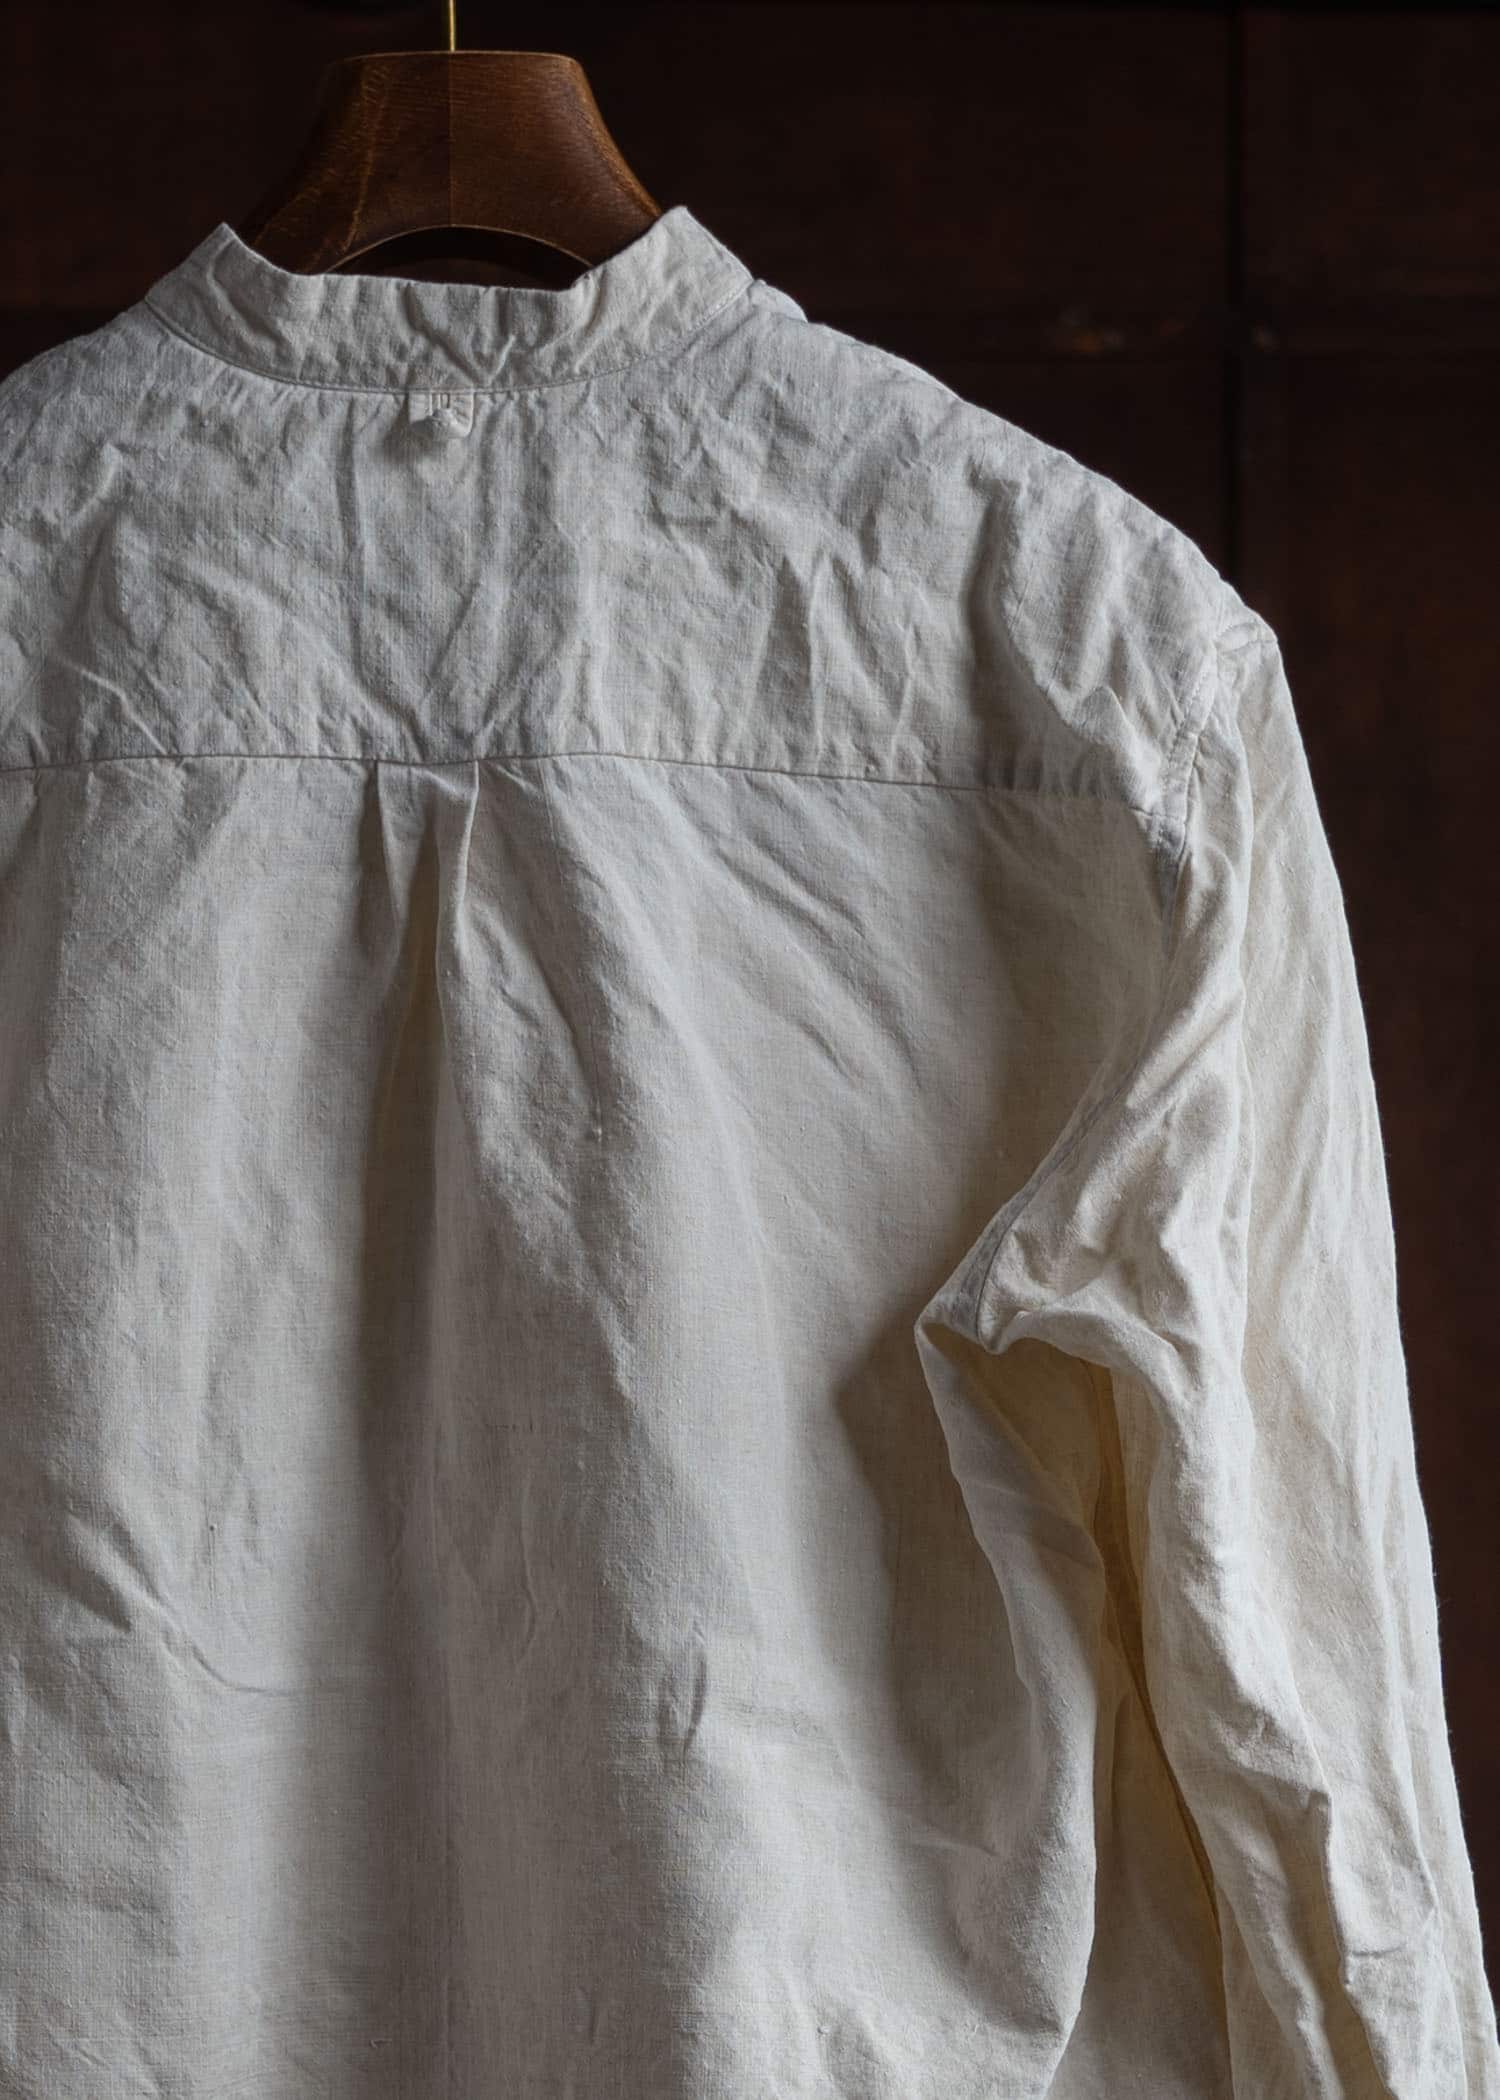 OLIVER CHURCH Scalloped Shirt  Antique French Linen